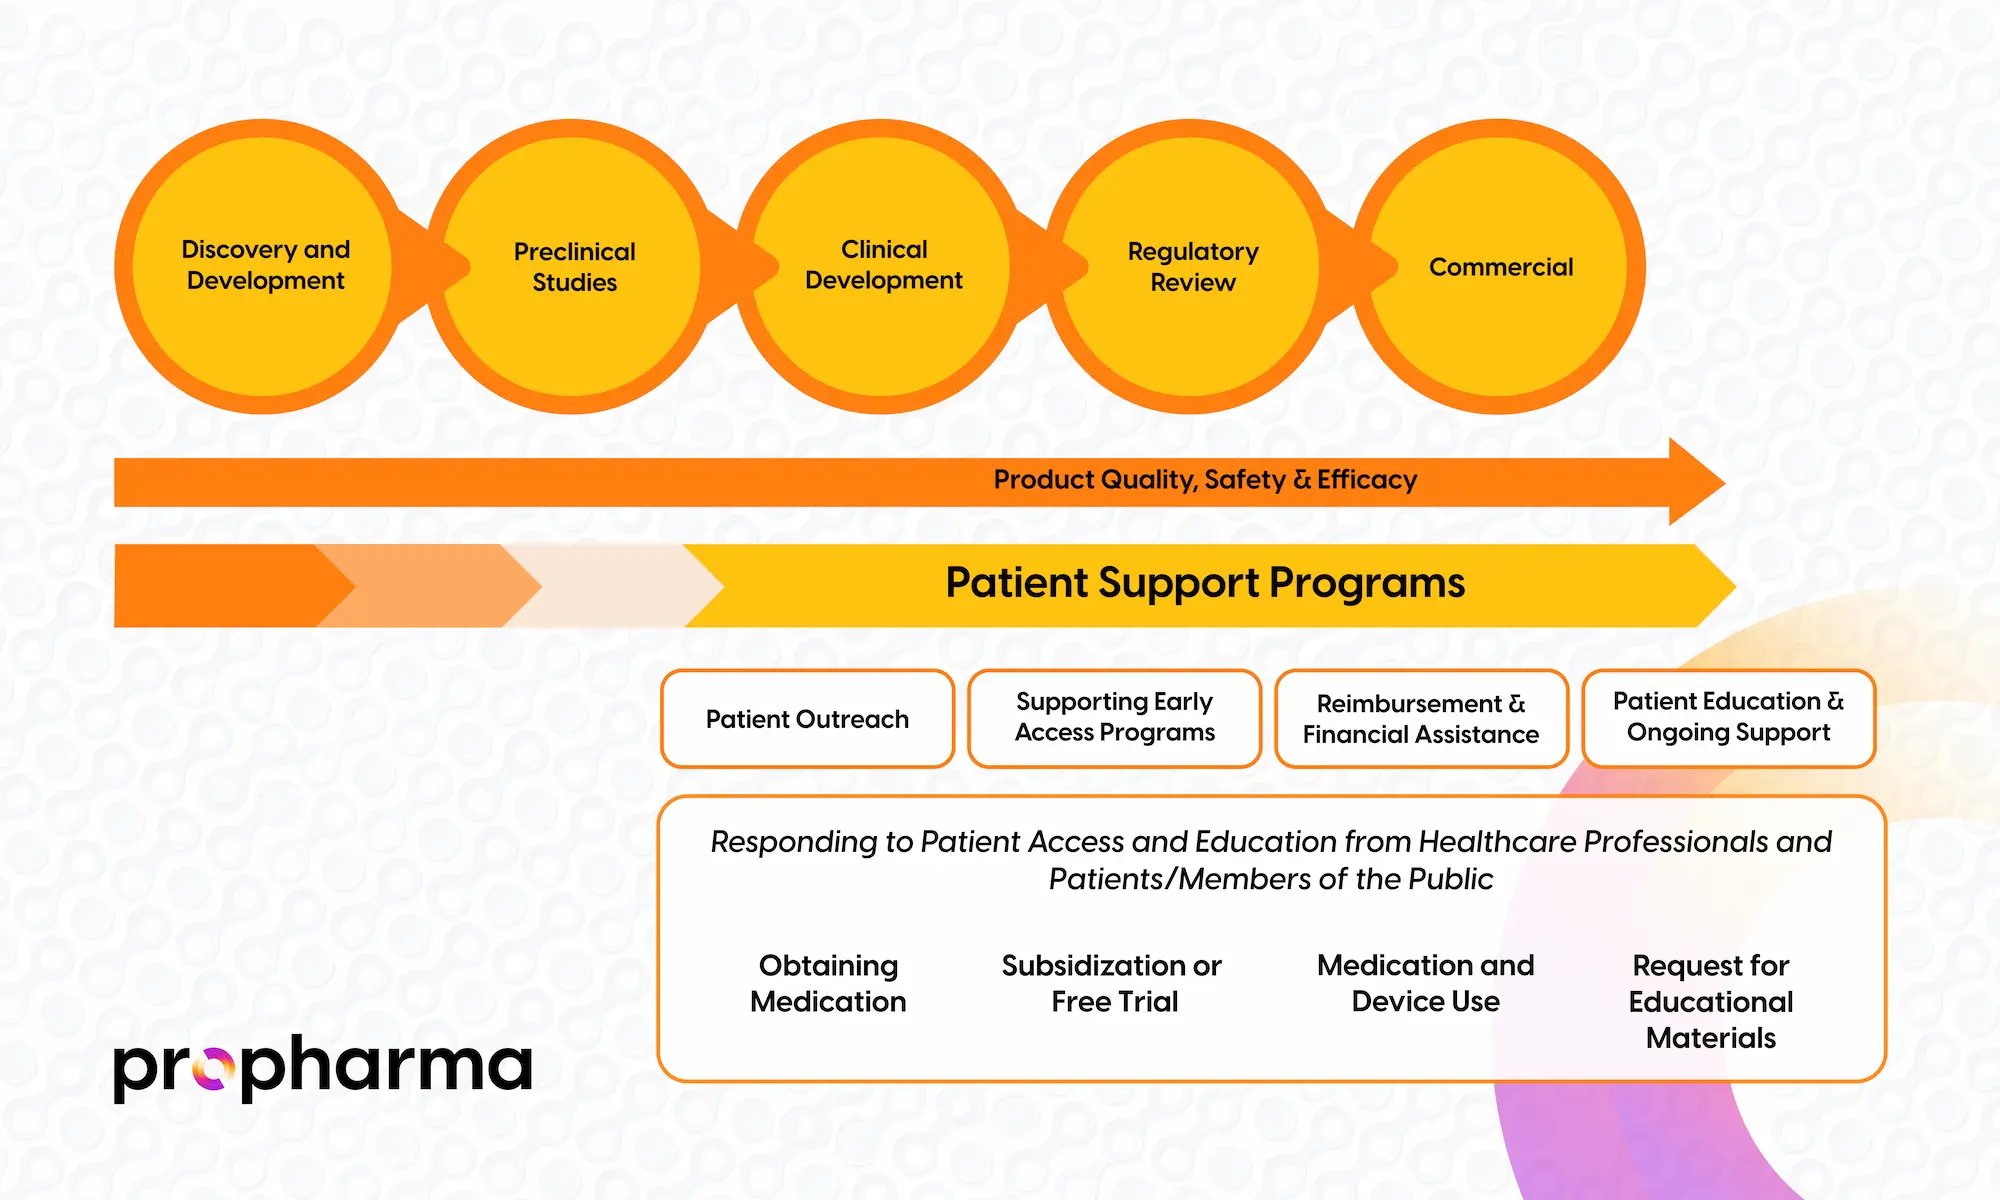 Illustration showing how ProPharma Patient Support Programs collaborate throughout the Drug Development Life Cycle.